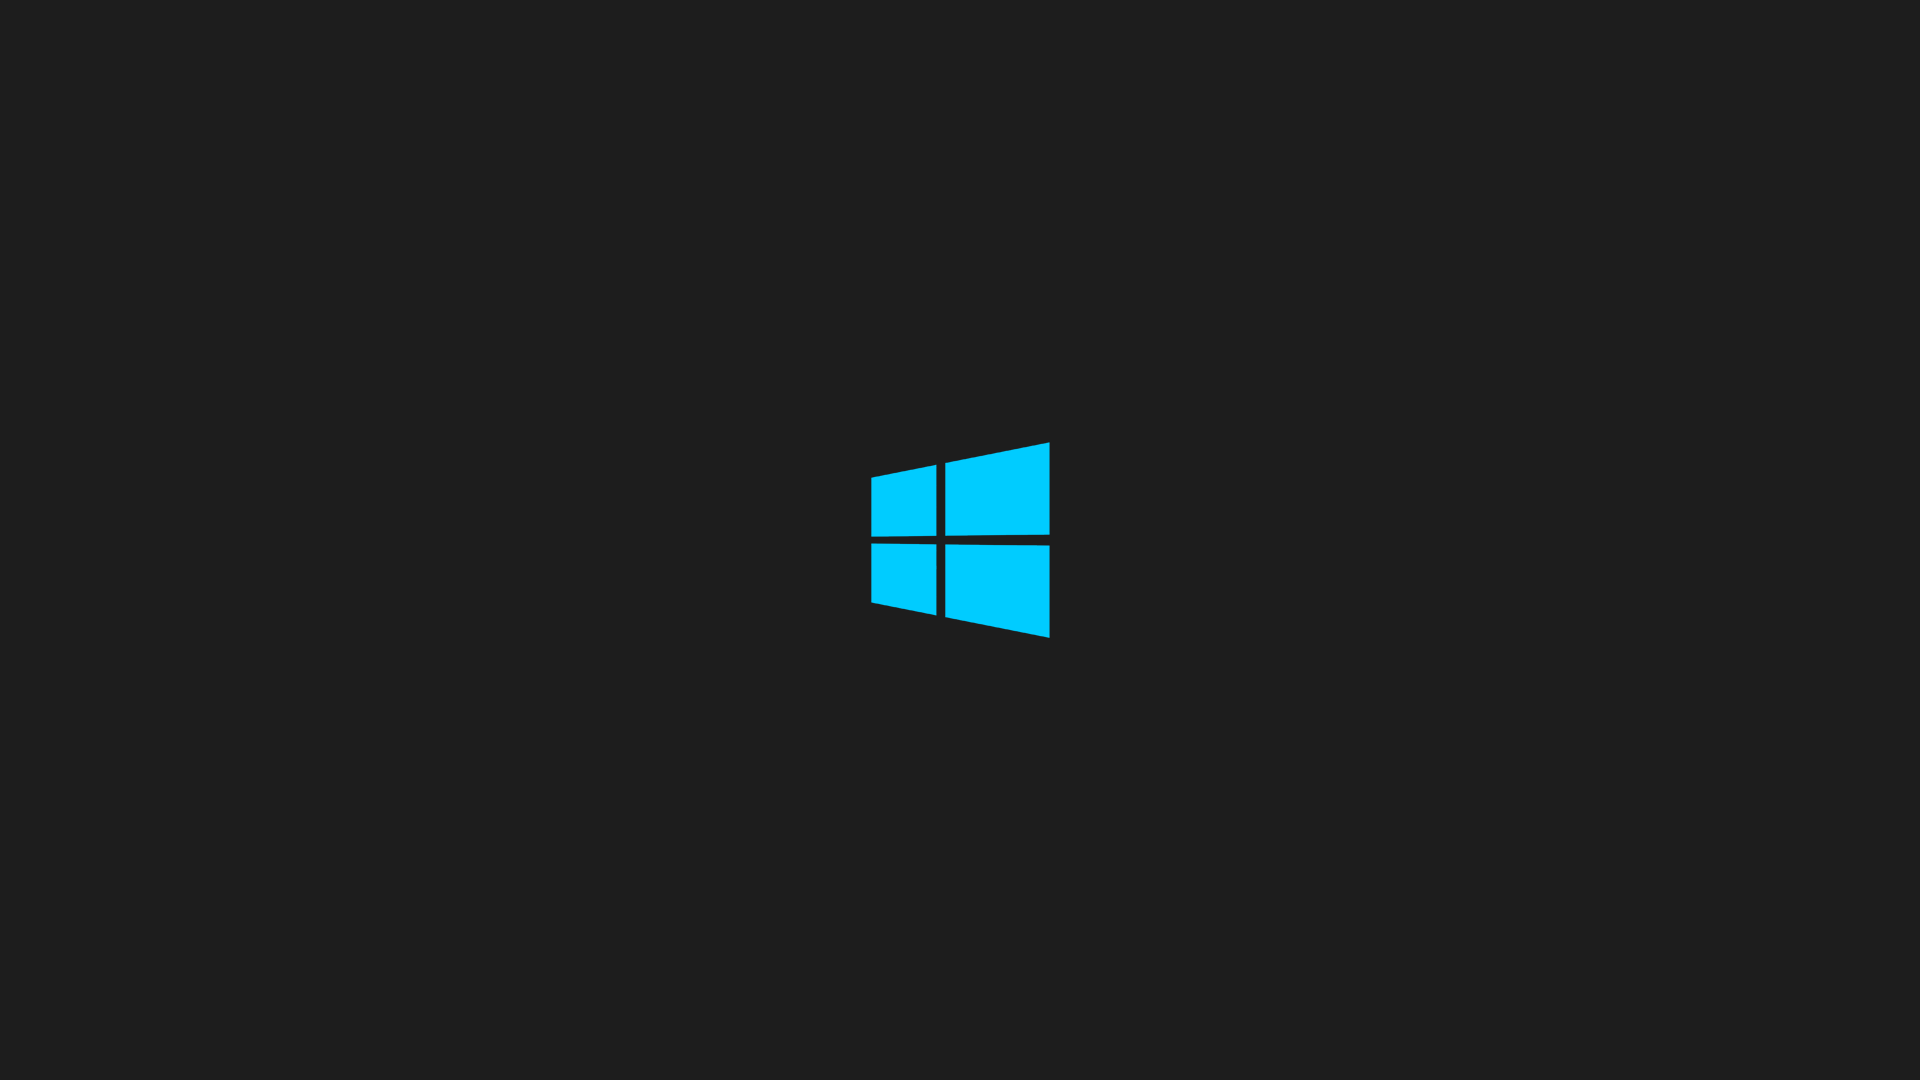 Windows 8 Default wallpaper | Awesome Wallpapers